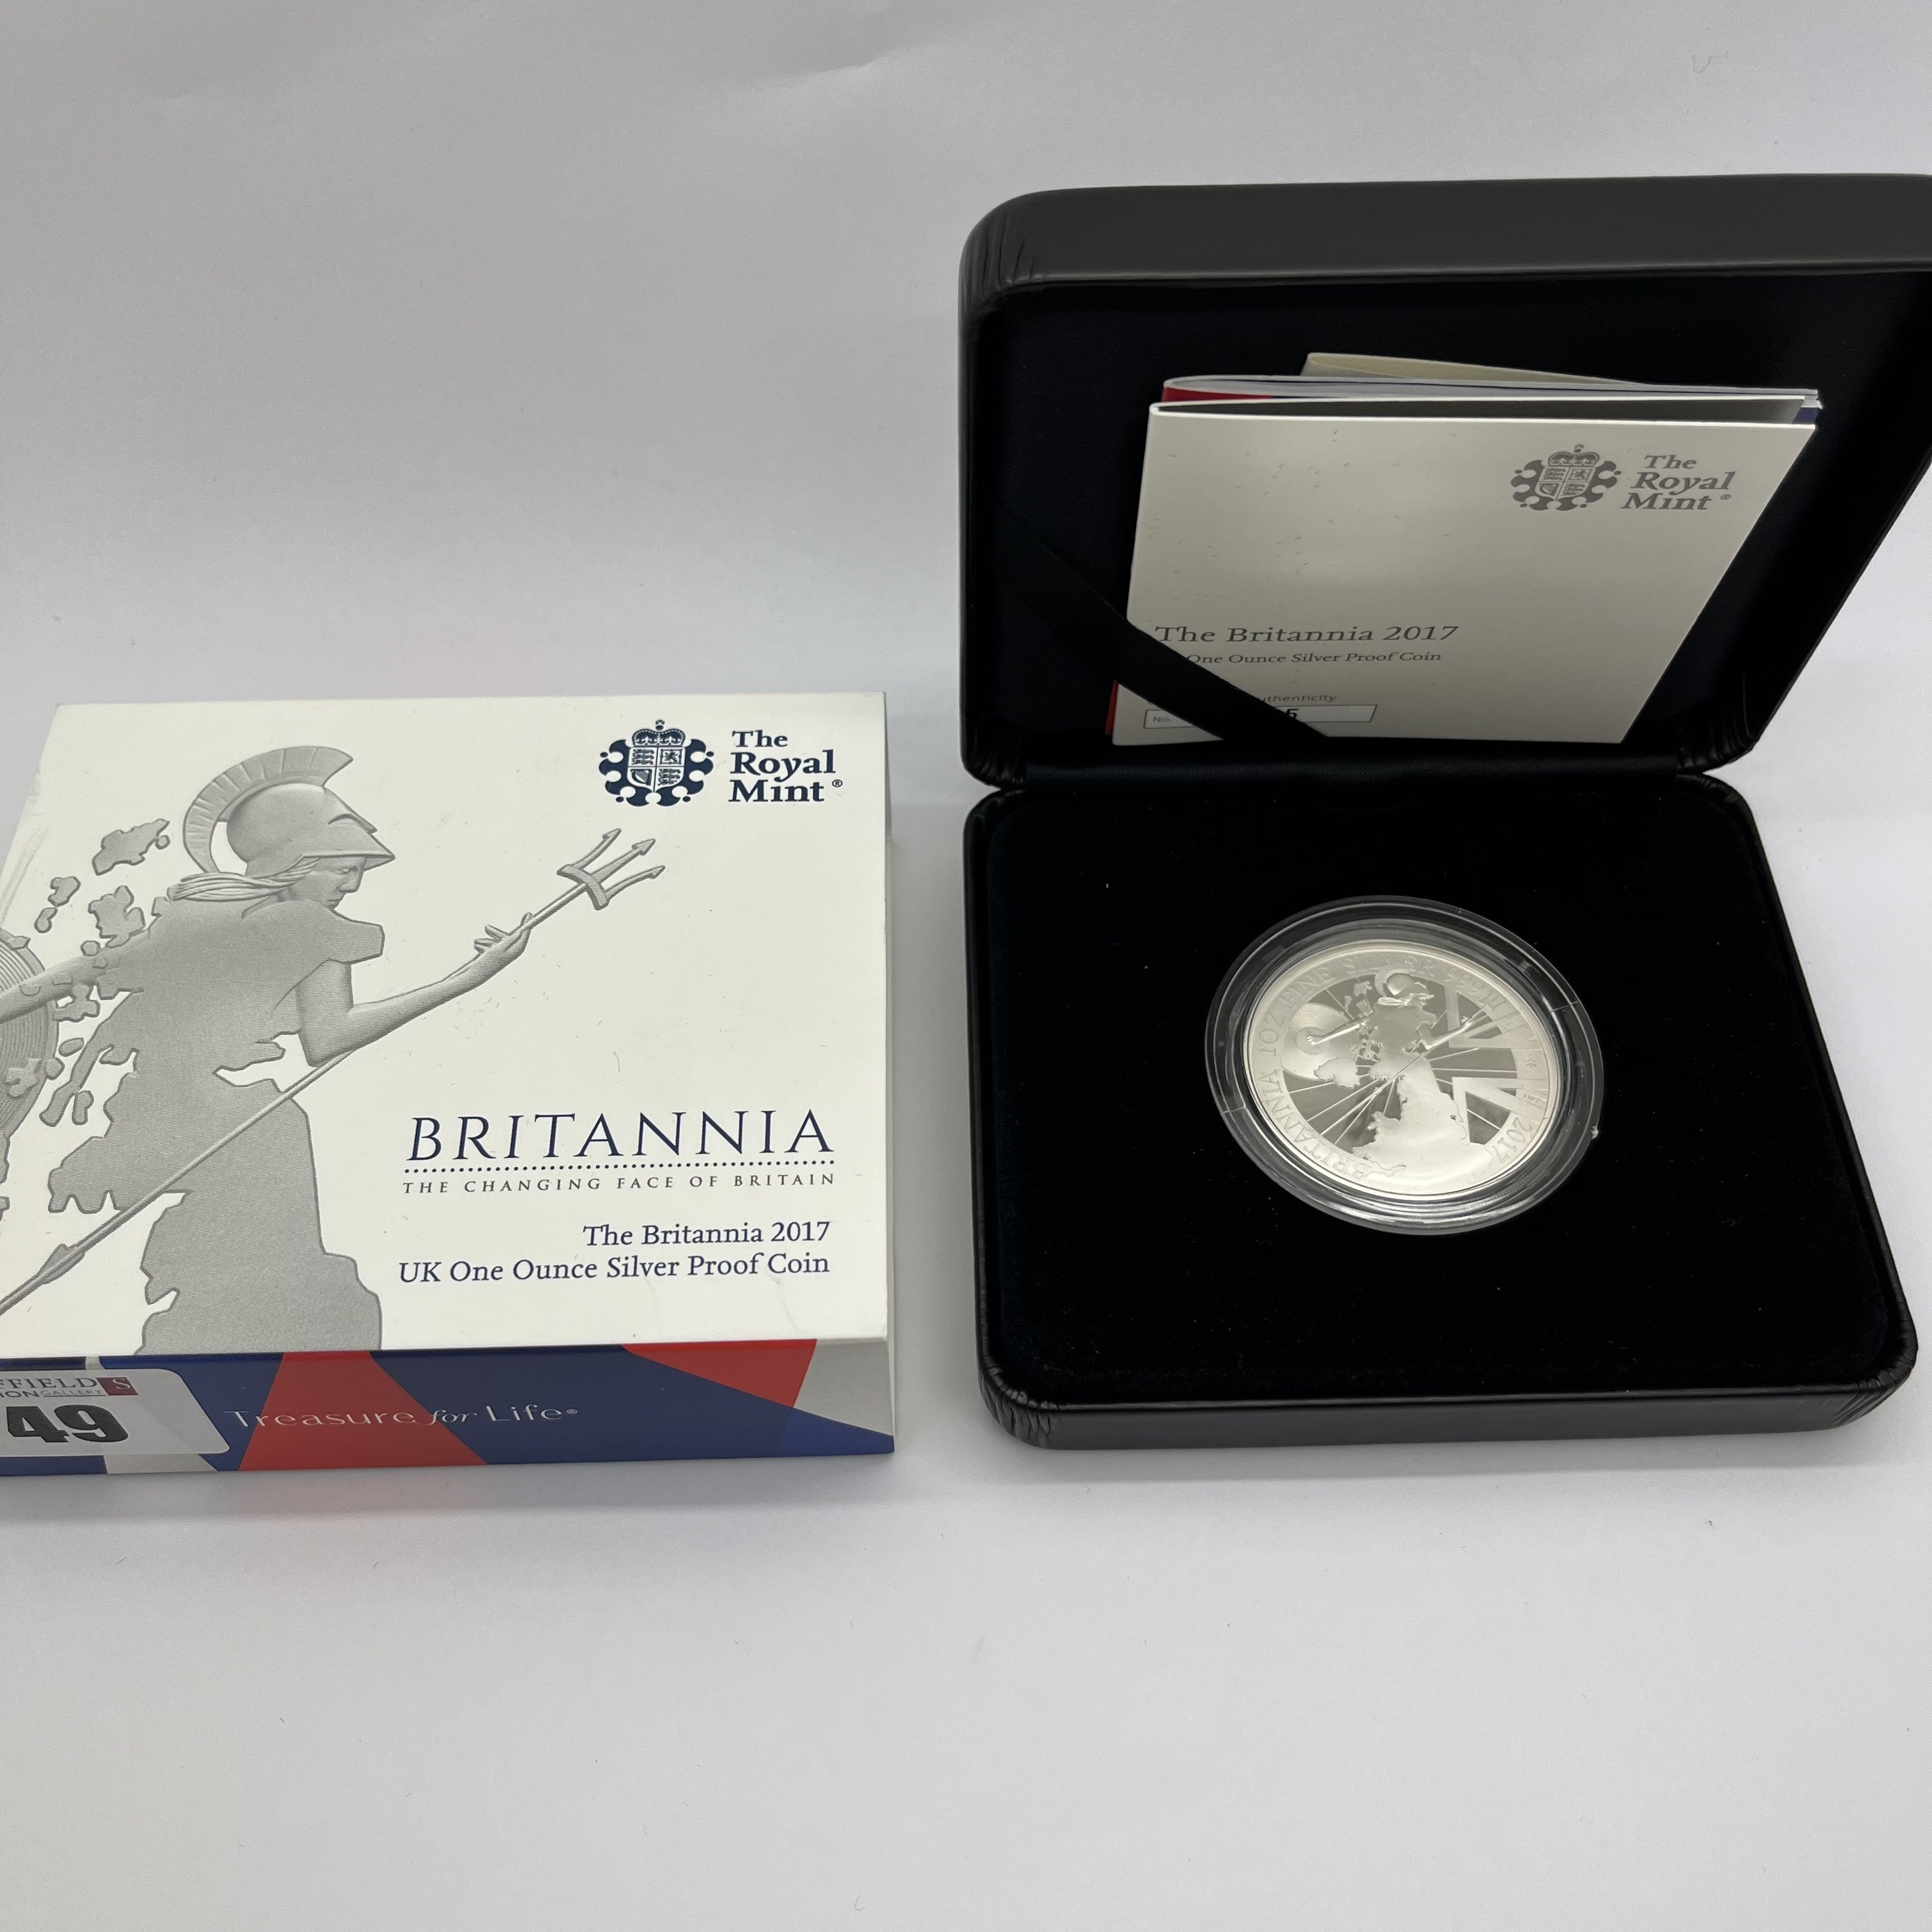 Royal Mint Silver Proof 2017 One Ounce Britannia Coin, boxed, with certificate of authenticity.